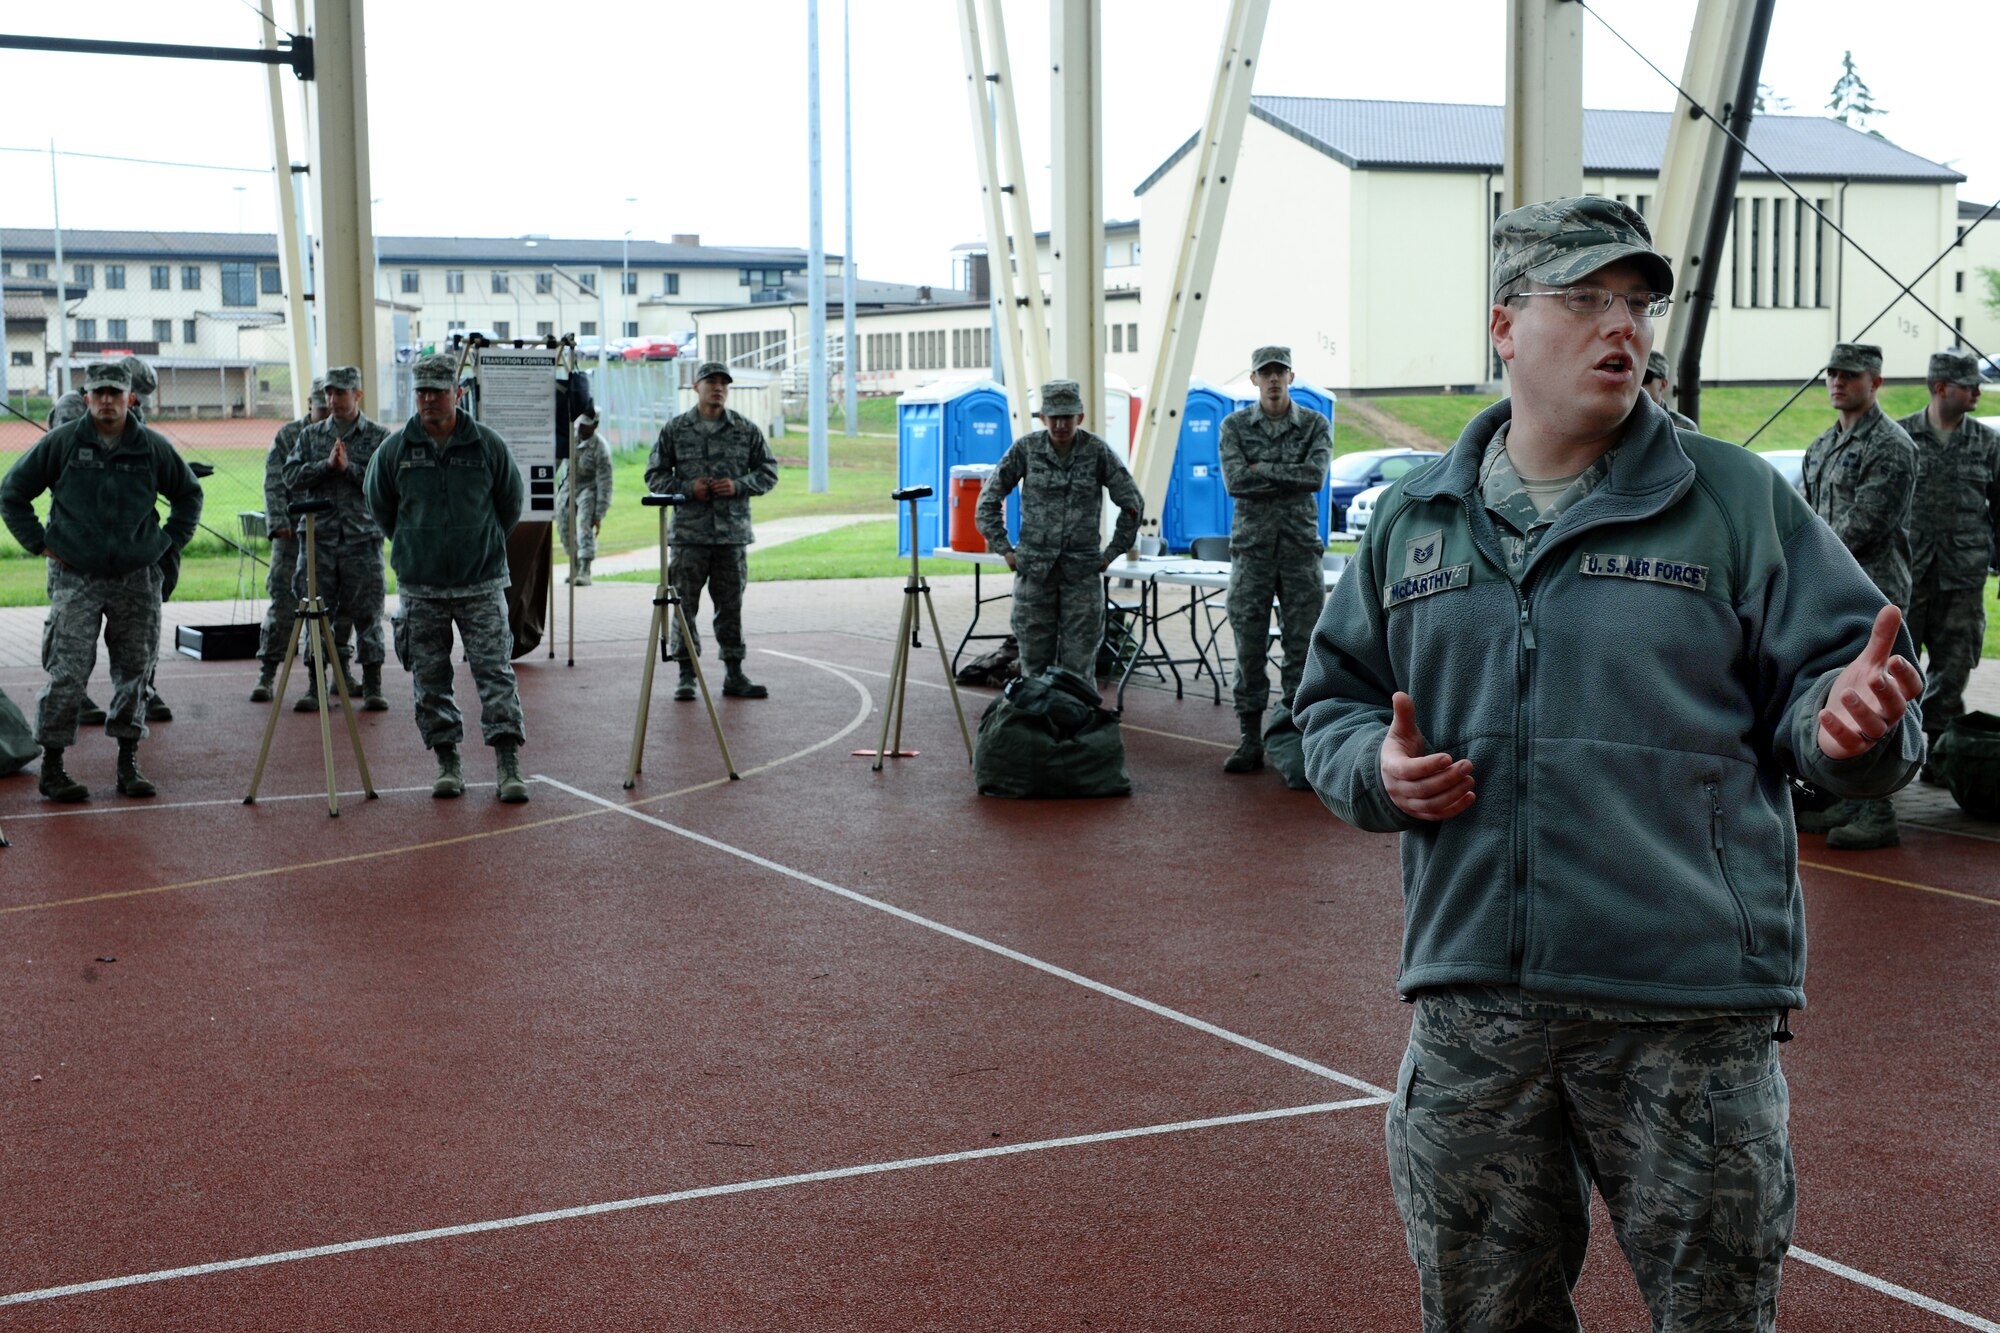 SPANGDAHLEM AIR BASE, Germany – Tech. Sgt. Conor McCarthy, 52nd Civil Engineer Squadron emergency management craftsmen, briefs Airmen before individual core competency skills training begins at the outdoor basketball court here May 7. The training evaluated Airmen on their combat readiness skills such as M-4 assault rifle weapons knowledge; self-aid buddy care; and chemical, biological, radiological, nuclear, and high-yield explosive preparedness. The training ensures the 52nd Fighter Wing is able to provide combat power to the current fight. (U.S. Air Force photo by Airman 1st Class Dillon Davis/Released)